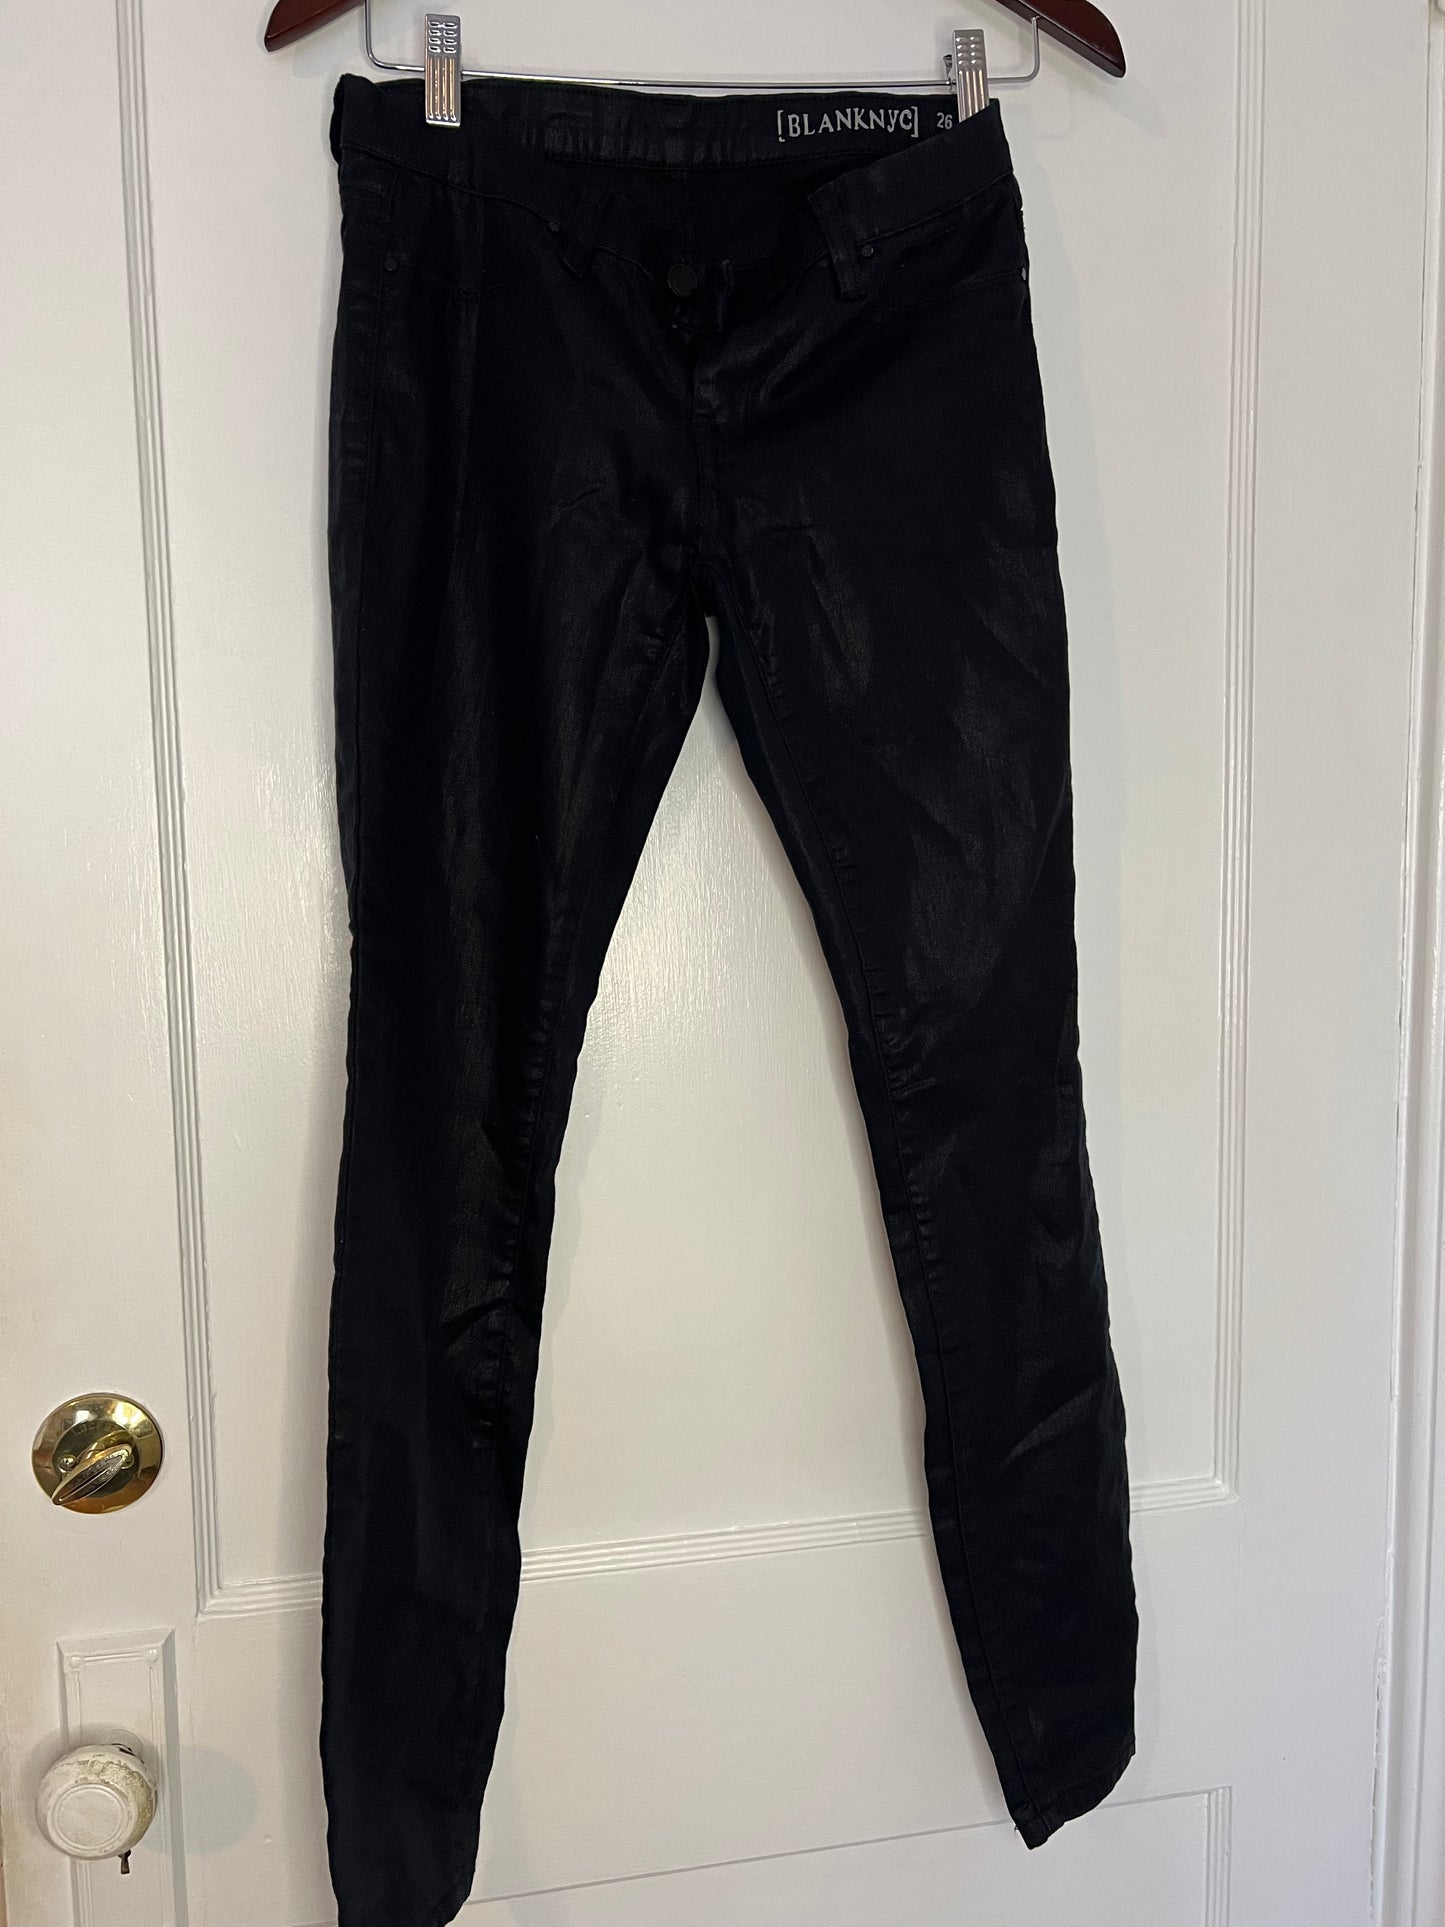 Blank NYC Black Shimmer Jeans Size 26 EUC PPU 45208 or SCO Spring Sale